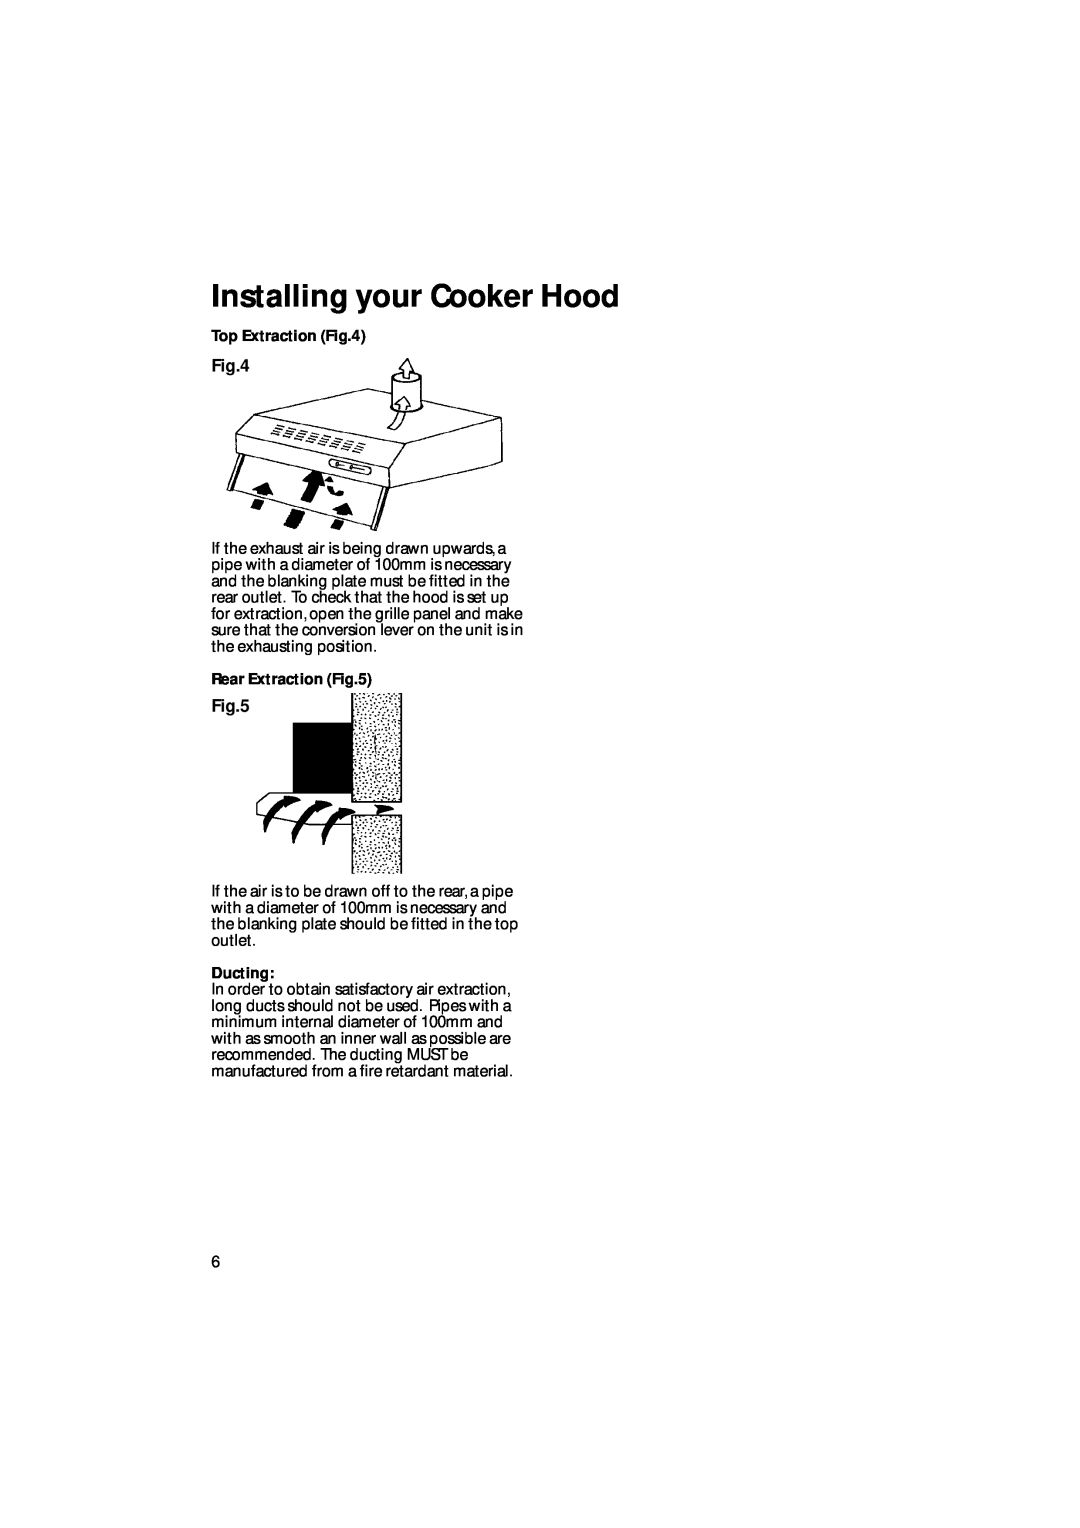 Creda CRV10 manual Installing your Cooker Hood, Top Extraction, Rear Extraction, Ducting 